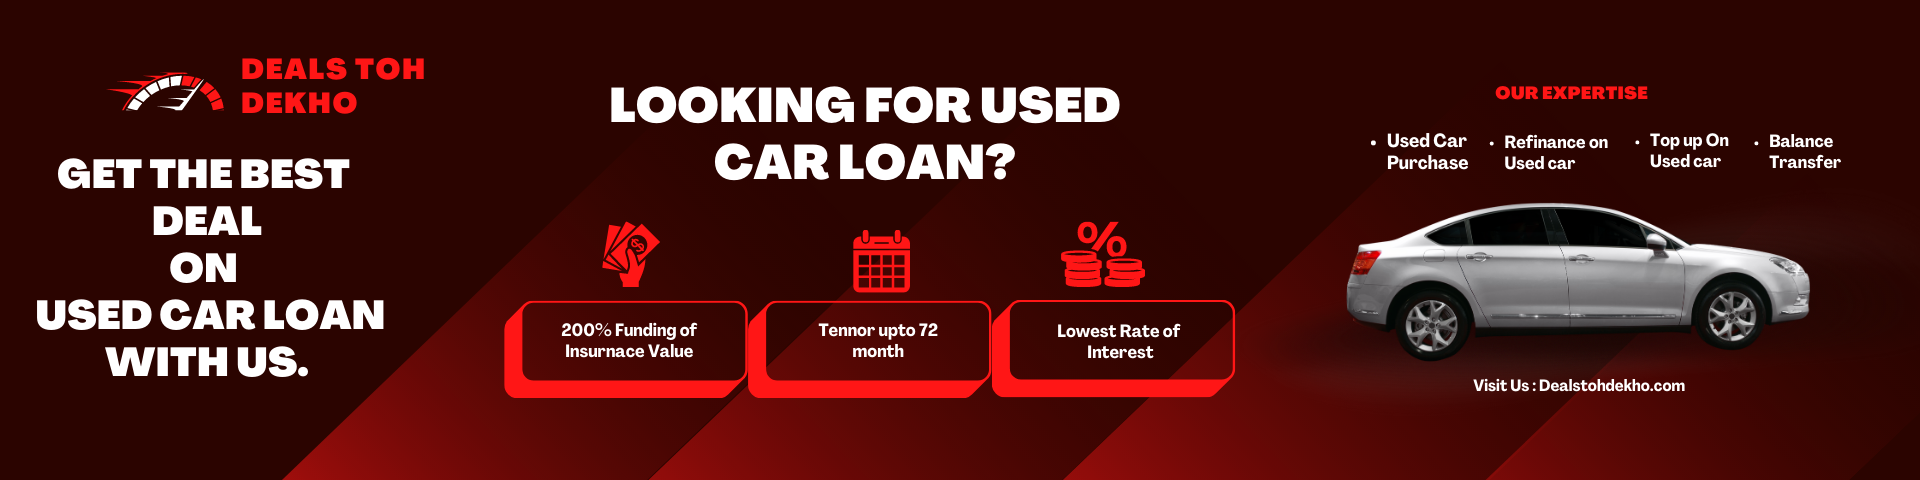 apply used car loan up to 200% of insurance value